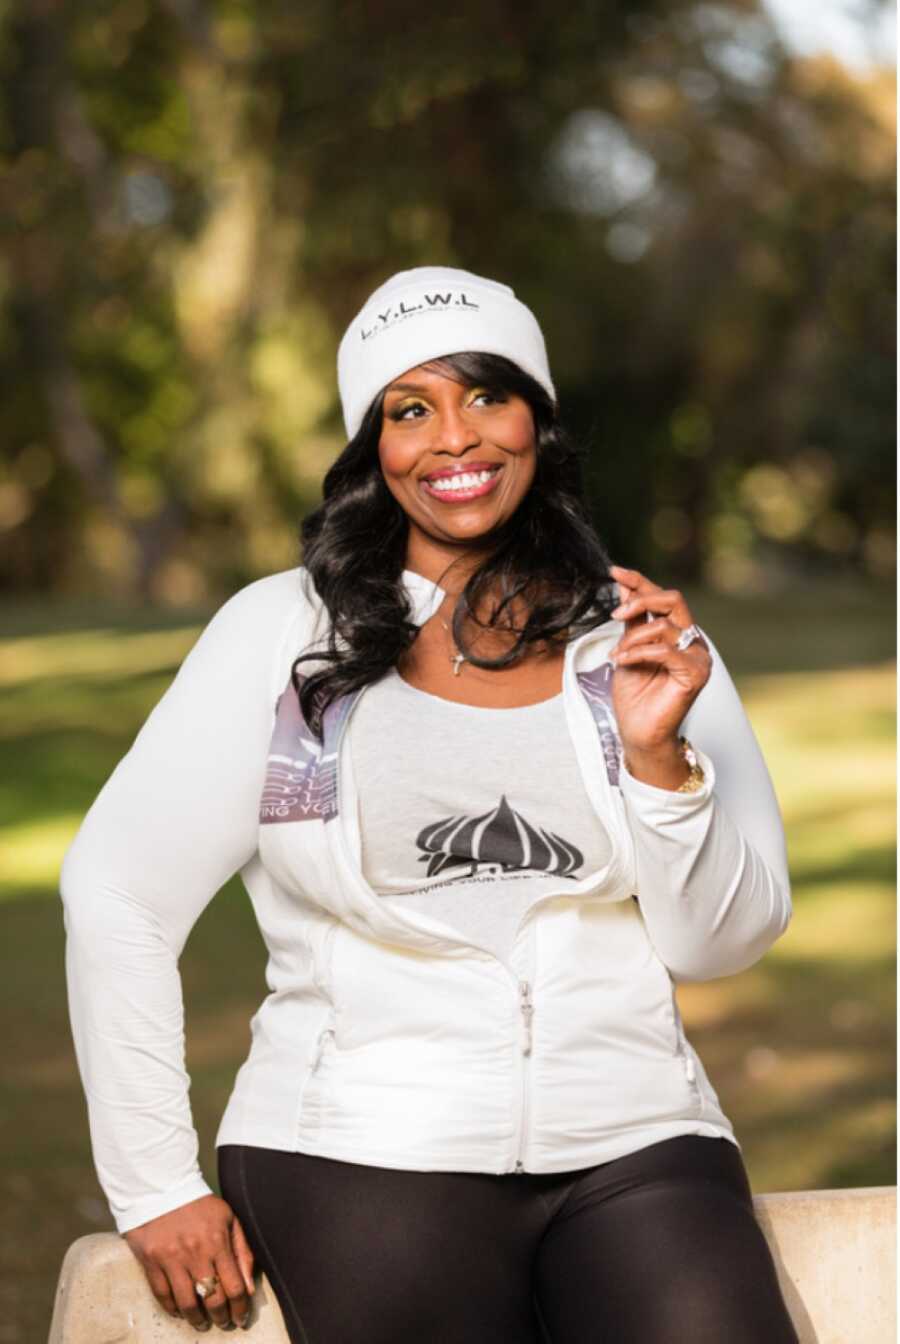 African American woman wearing matching white outfit with the logo and initials of her company called Living Your Life Without Limits